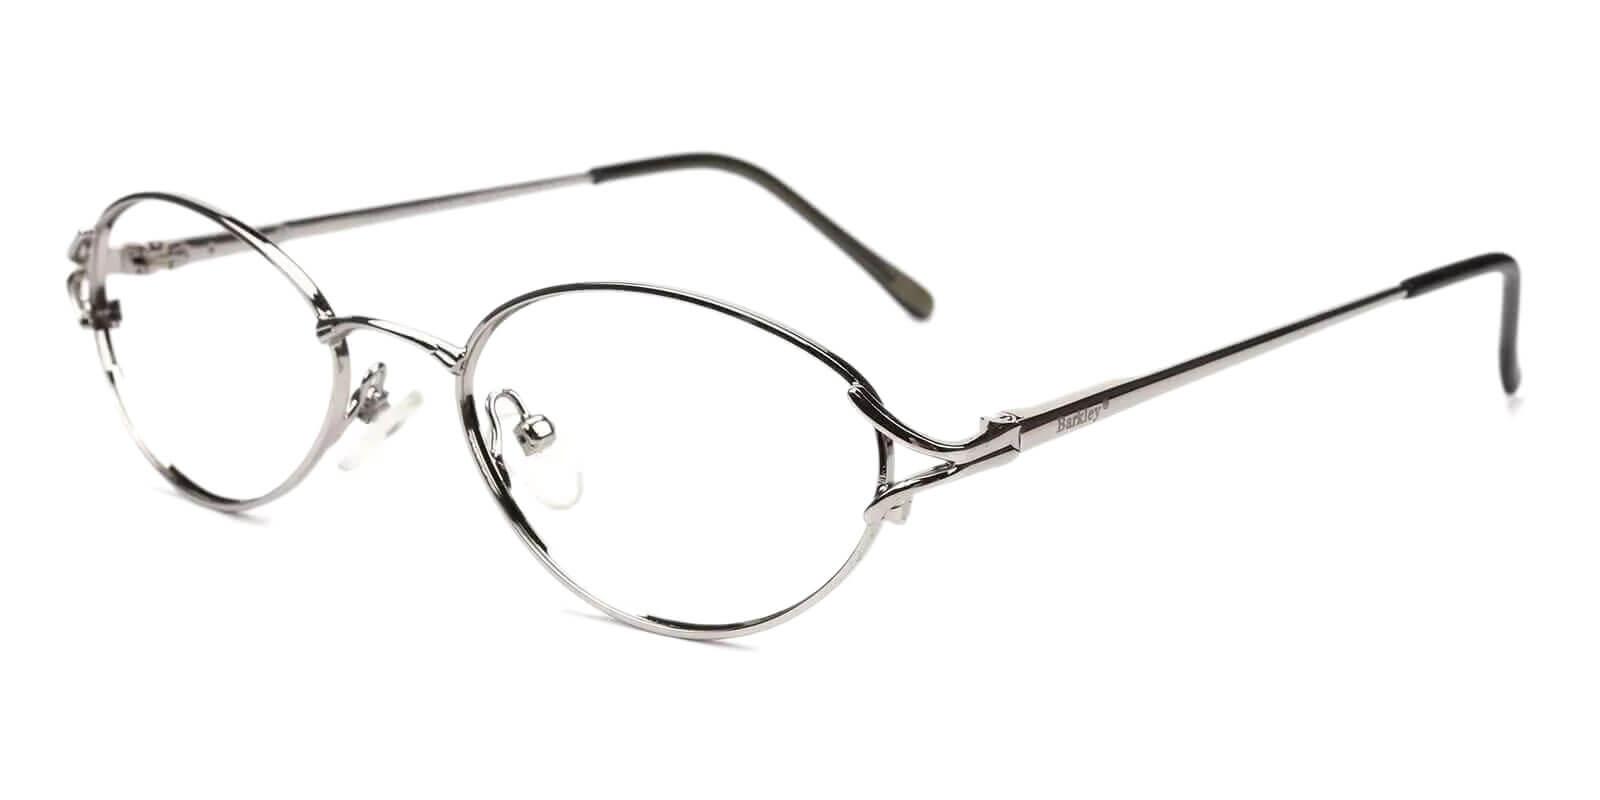 Cora Silver Metal Eyeglasses , NosePads Frames from ABBE Glasses